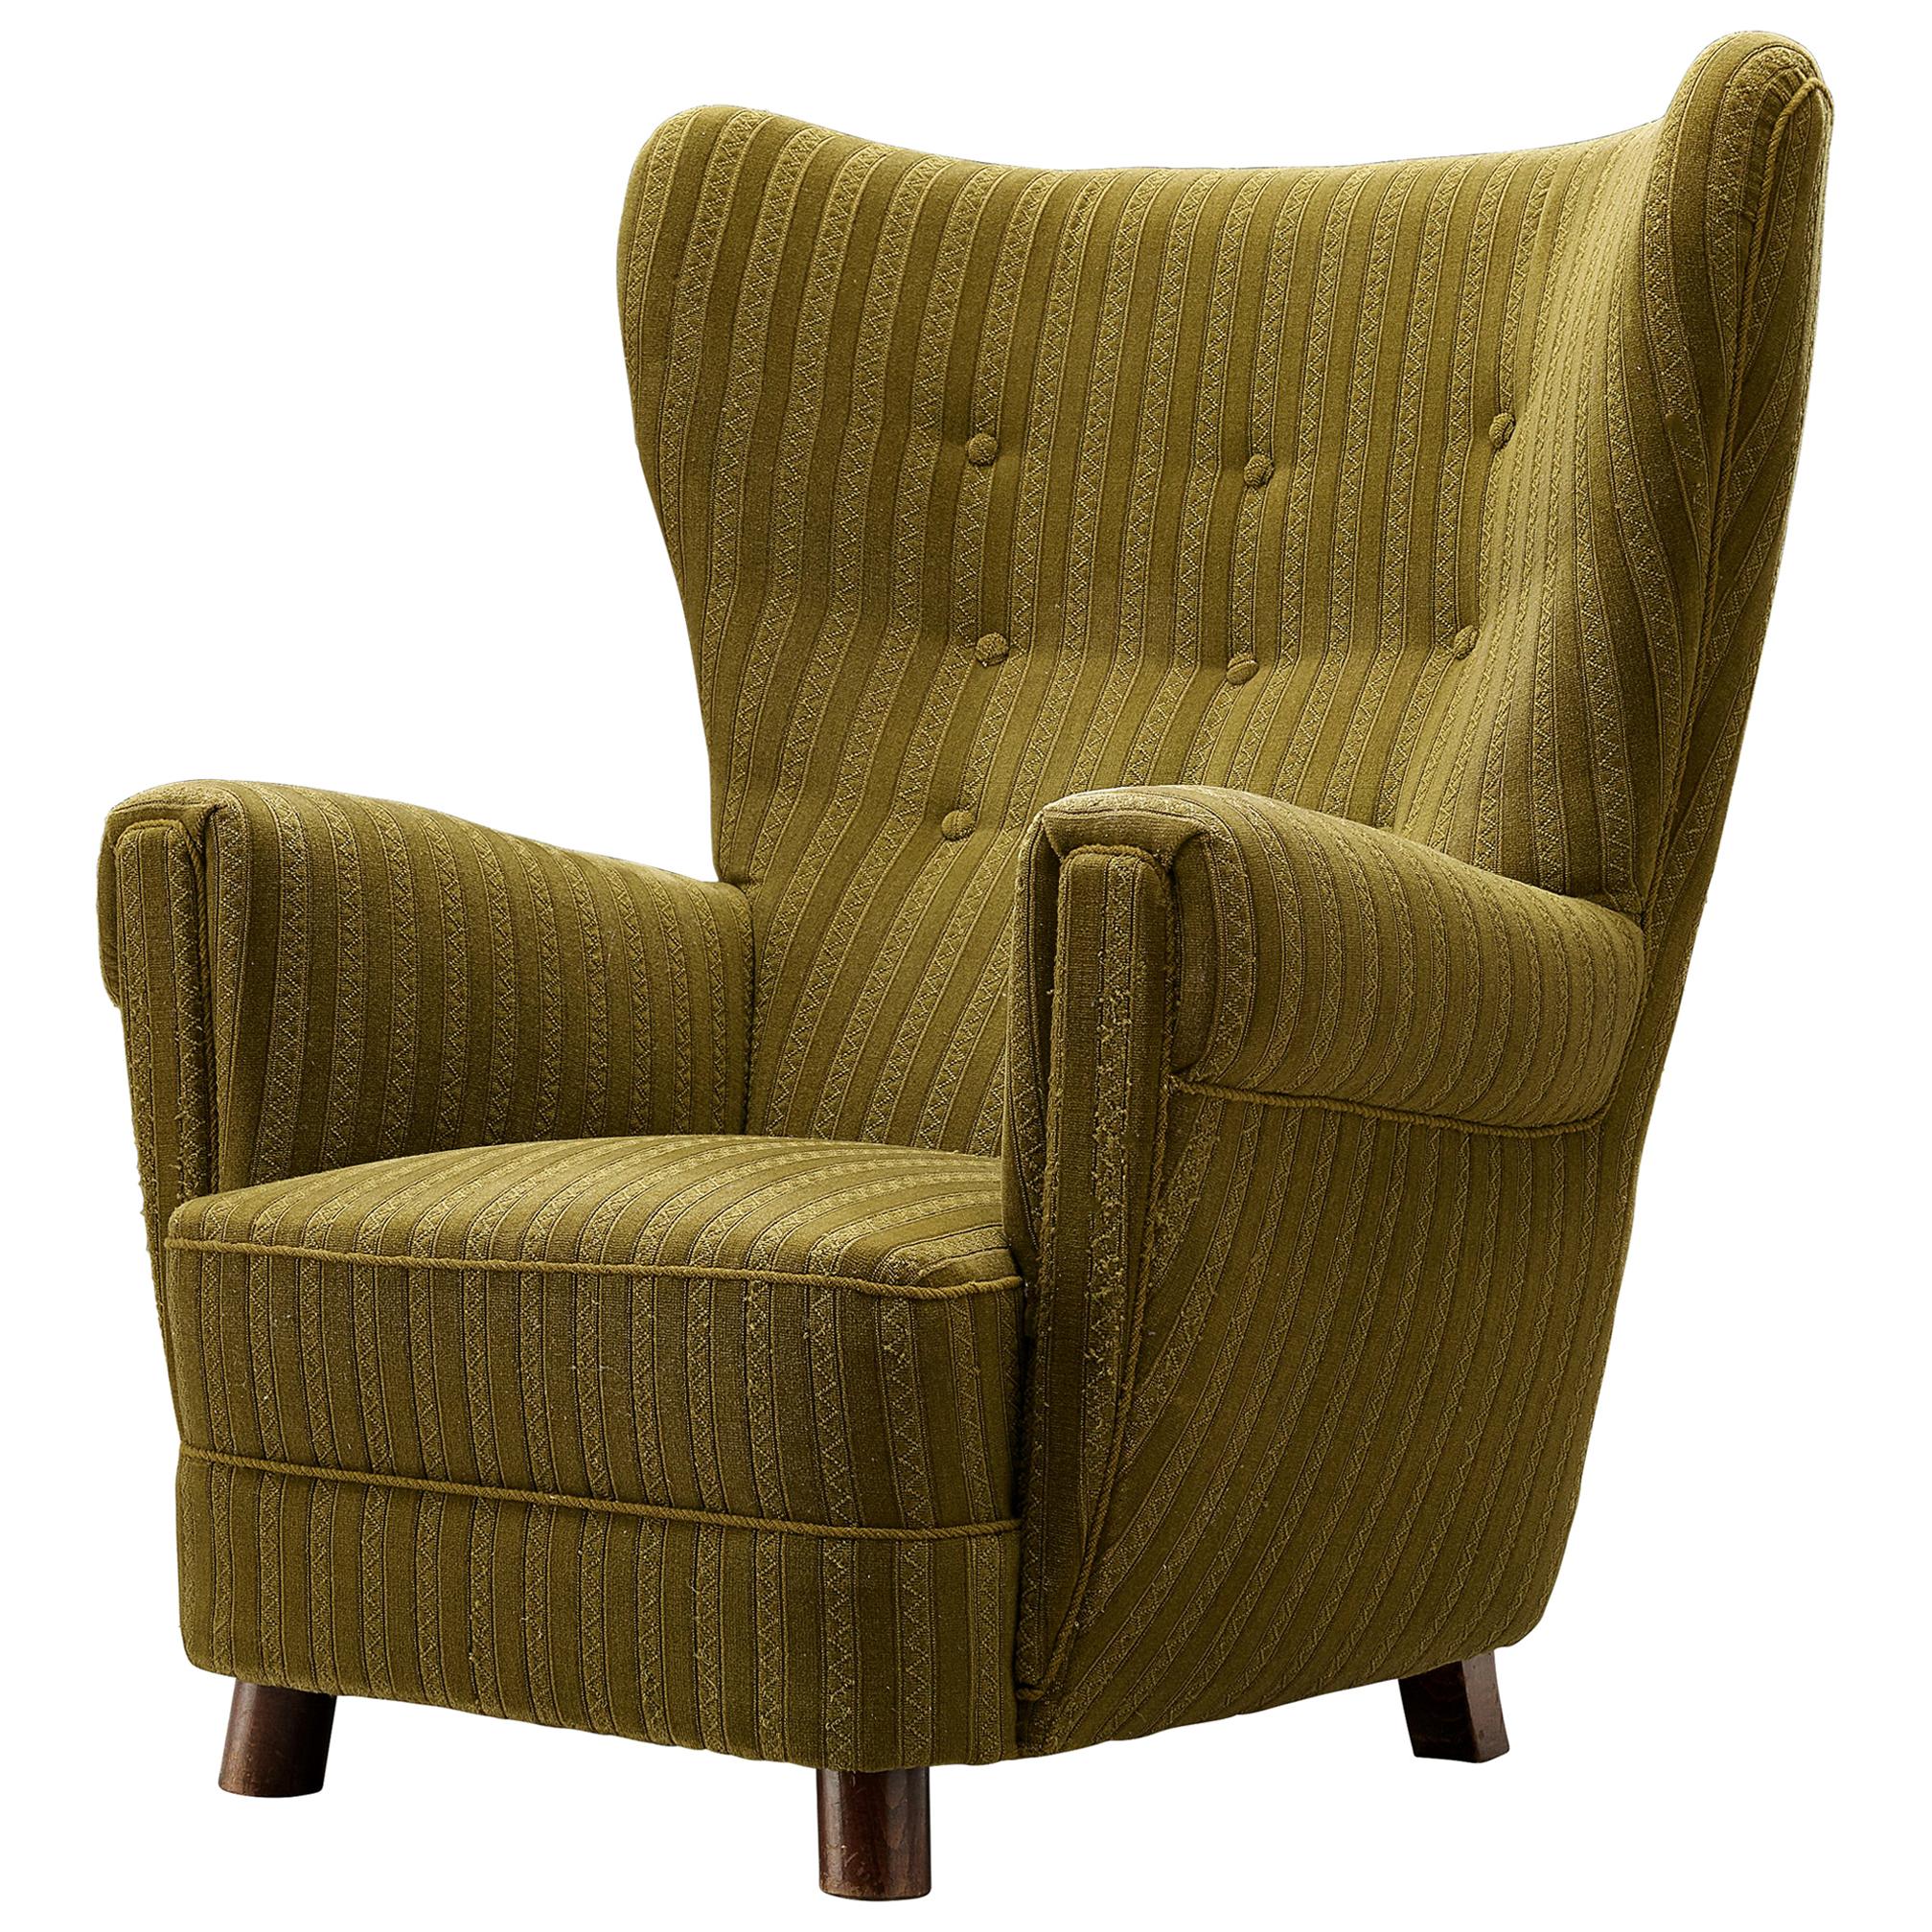 Private Listing for M: Danish Wingback Lounge Chair in Green Upholstery